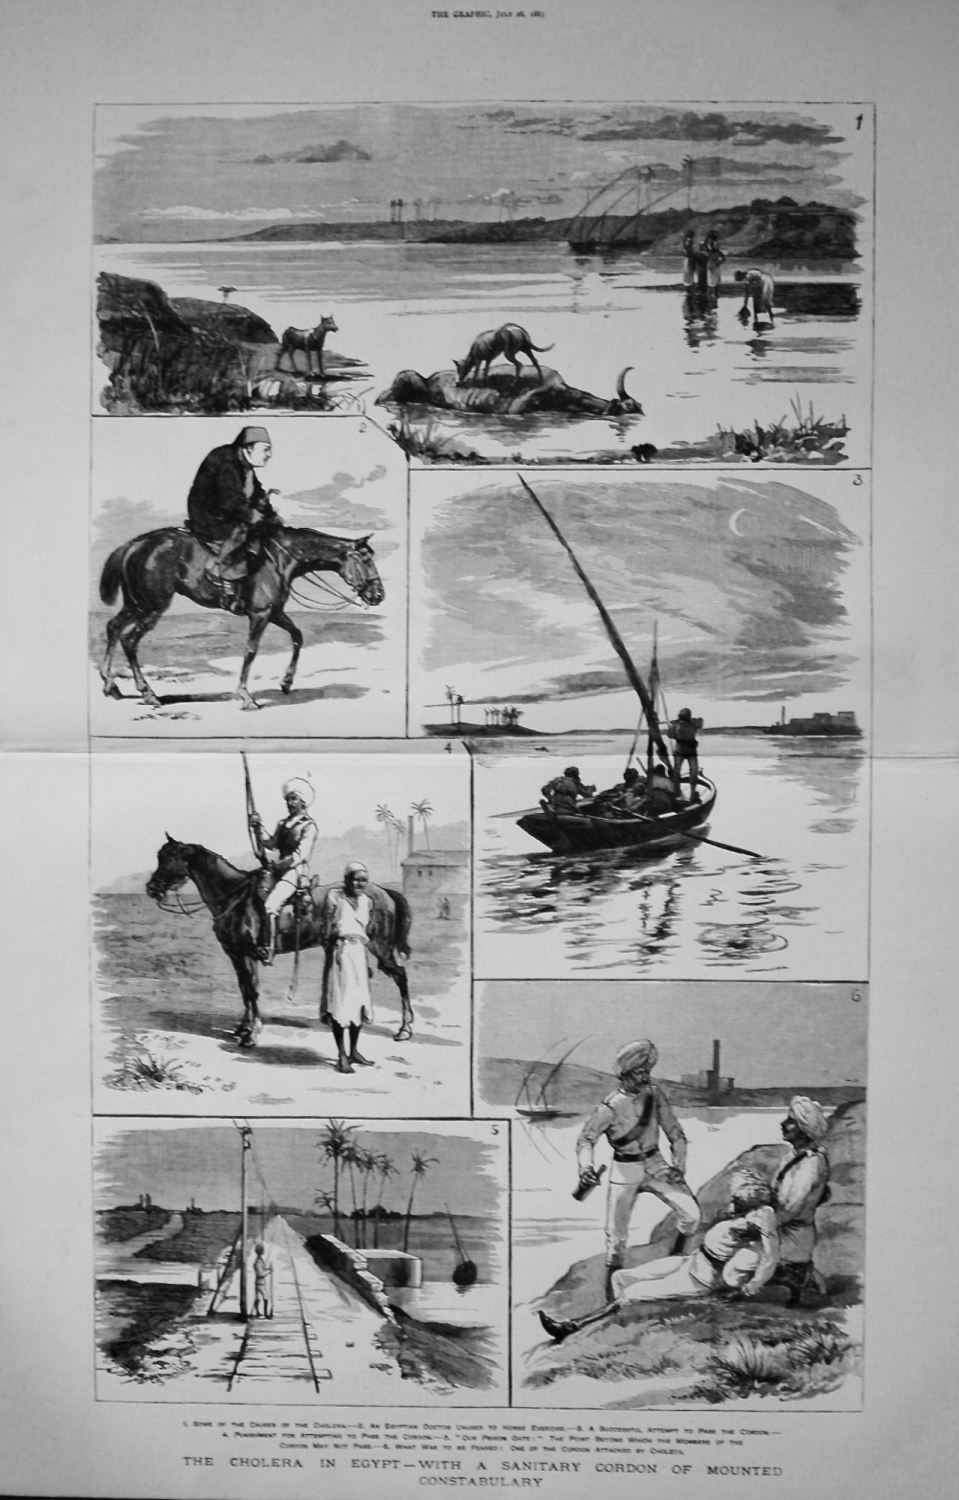 Cholera in Egypt - With a Sanitary Cordon of Mounted Constabulary. 1883.